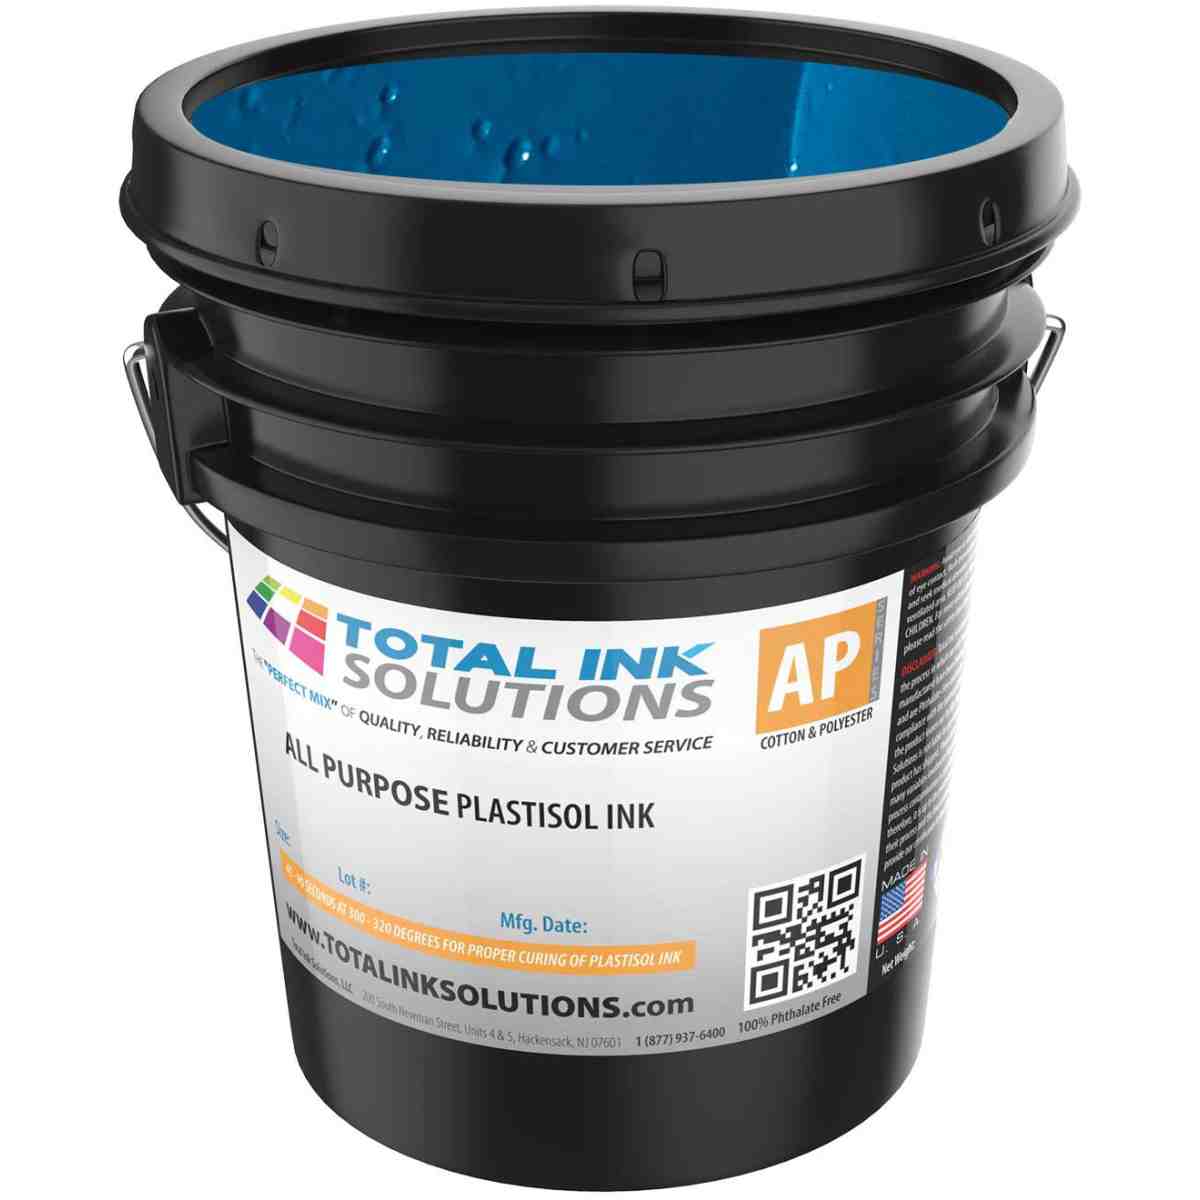 All Purpose Plastisol Ink Gallon TOTAL INK SOLUTIONS®